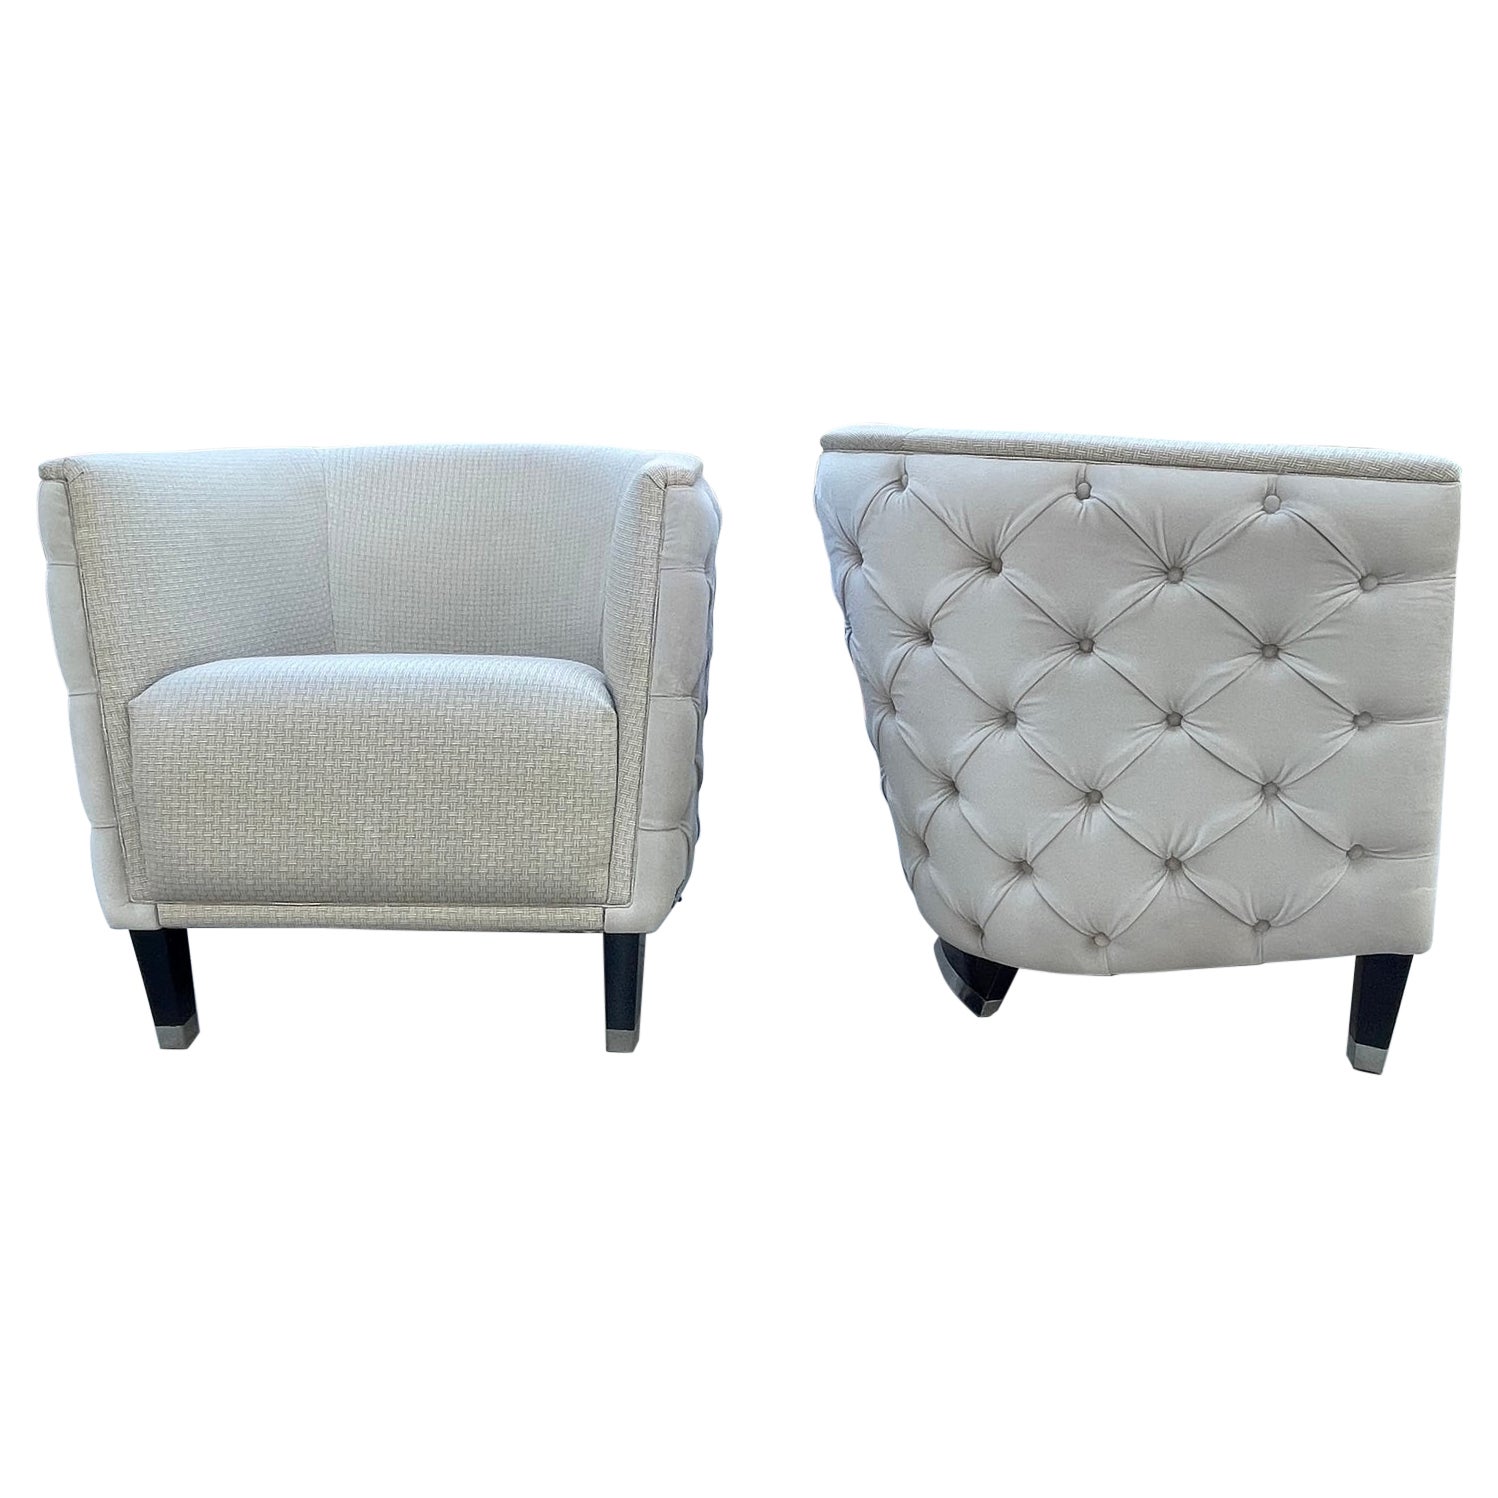 Pair of Lounge Chairs with Tufted Backs by Luxury Living For Sale